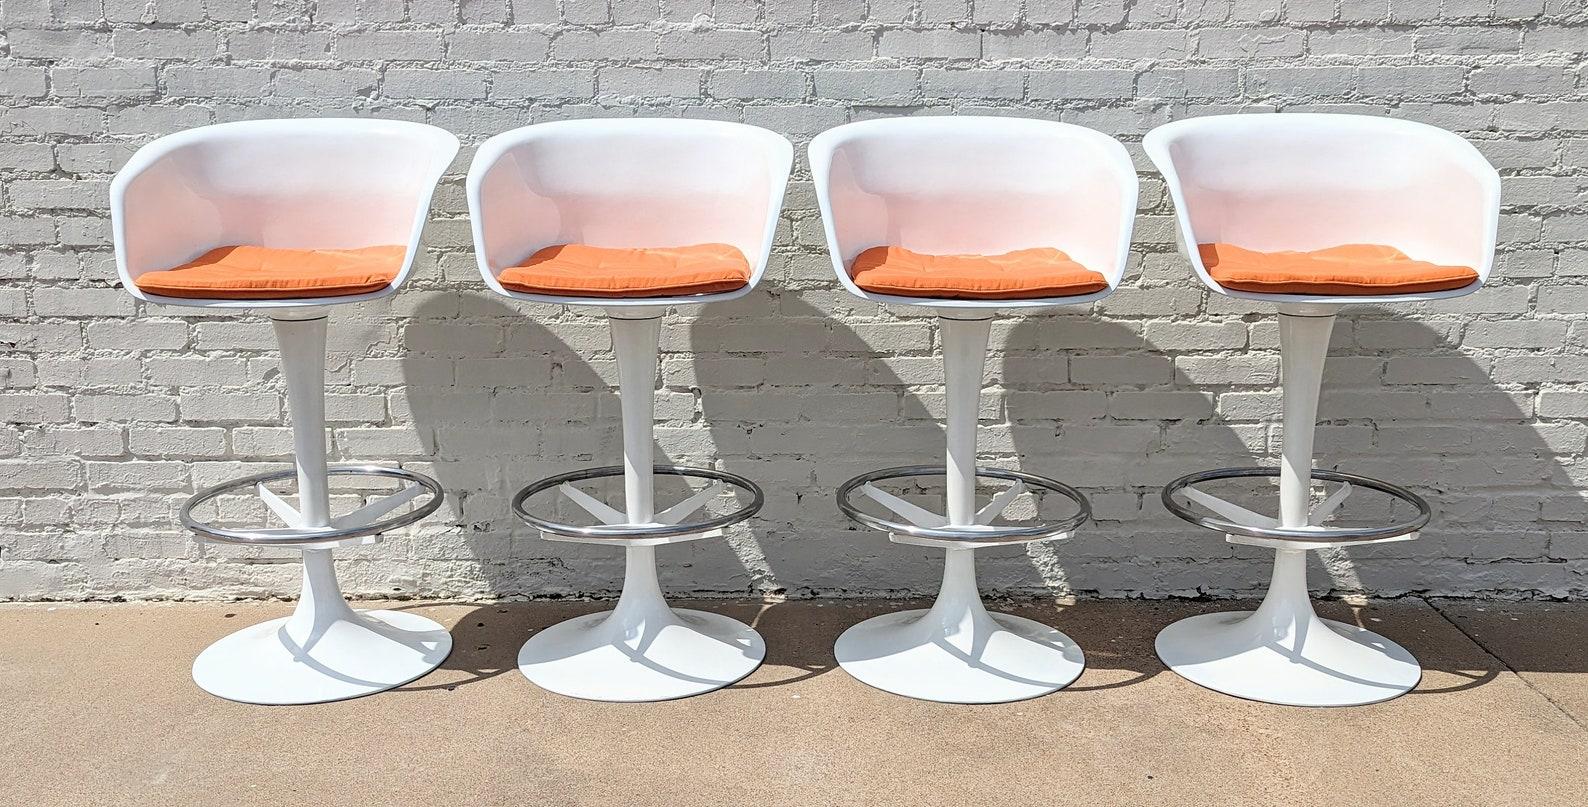 Mid Century Modern Burke Tulip Barstools

Above average vintage condition and structurally sound. Has some expected slight finish wear and scratching. Swivel works smoothly on all chairs. Chairs have been recovered recently and done professionally